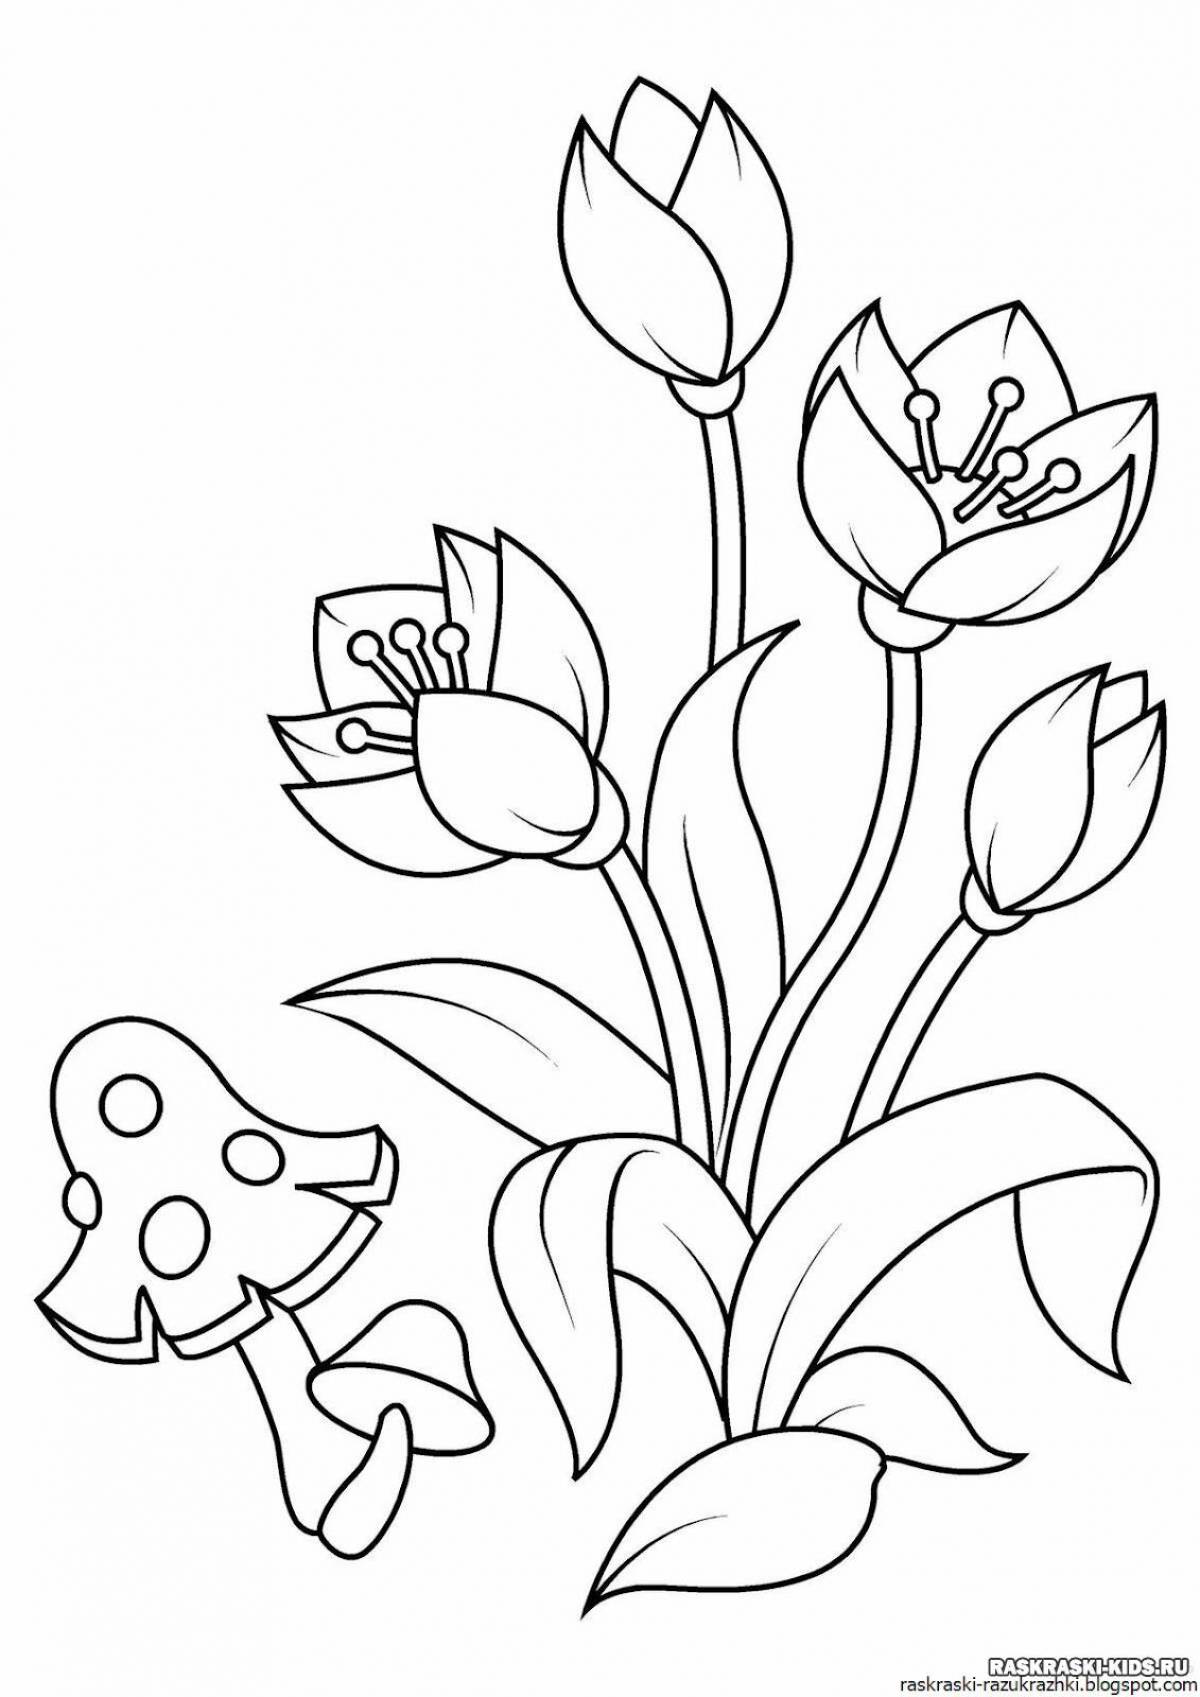 Fabulous flower coloring pages for girls